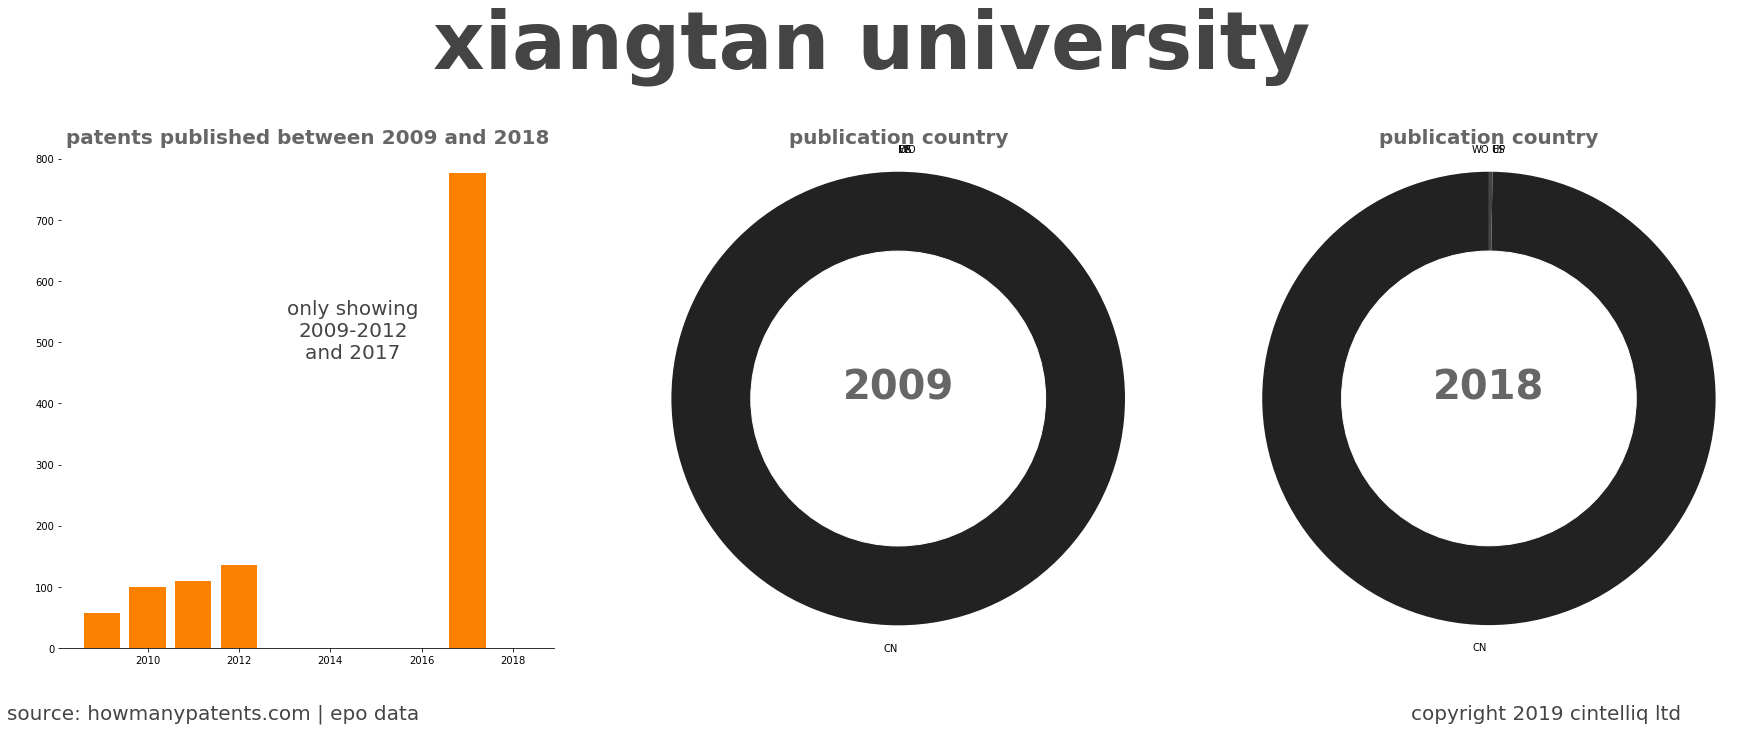 summary of patents for Xiangtan University